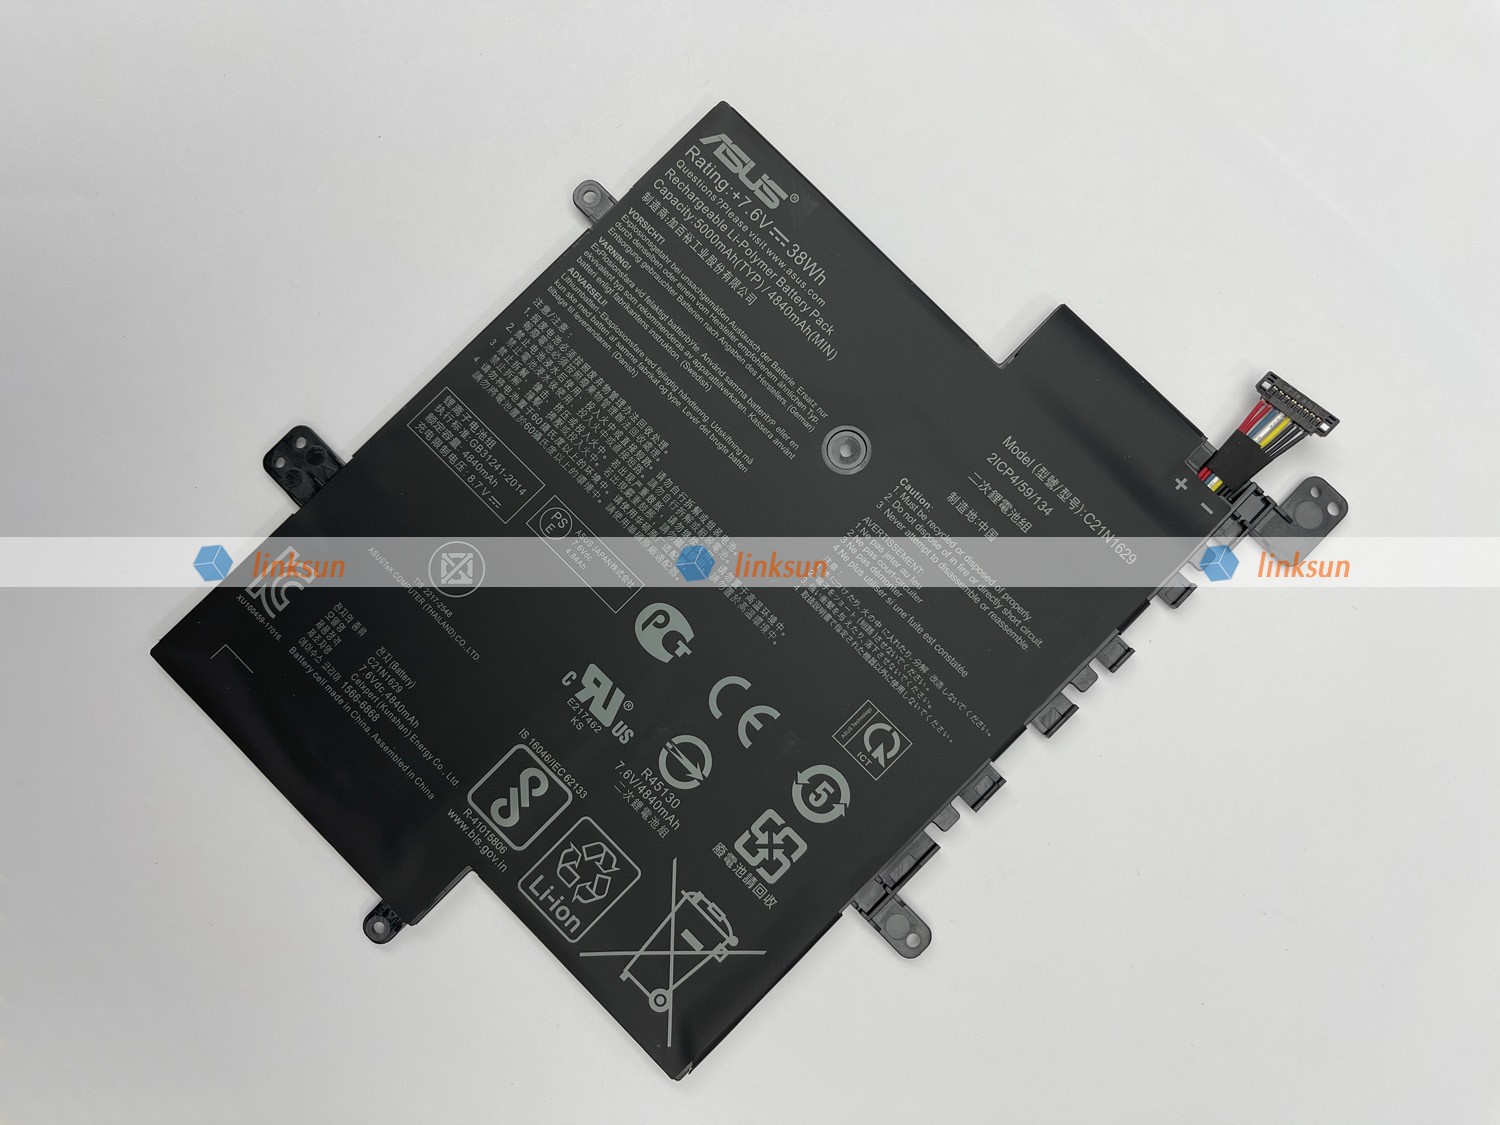 C21N1629 battery inclined